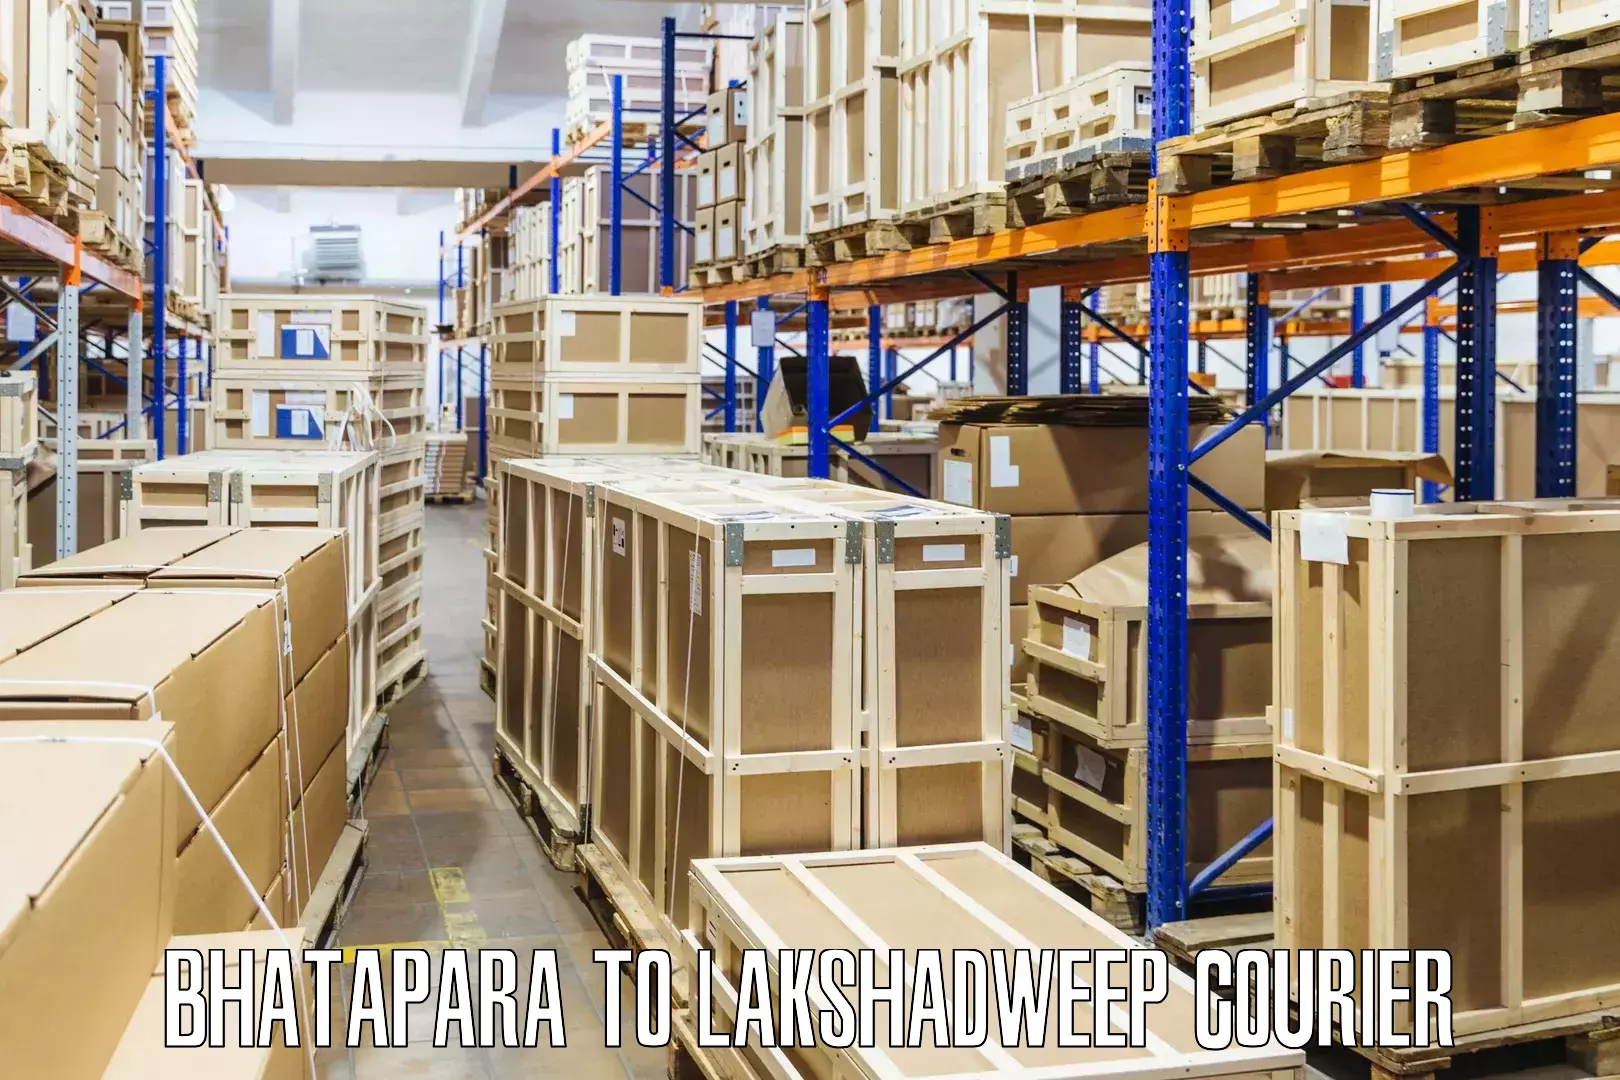 Reliable courier service Bhatapara to Lakshadweep